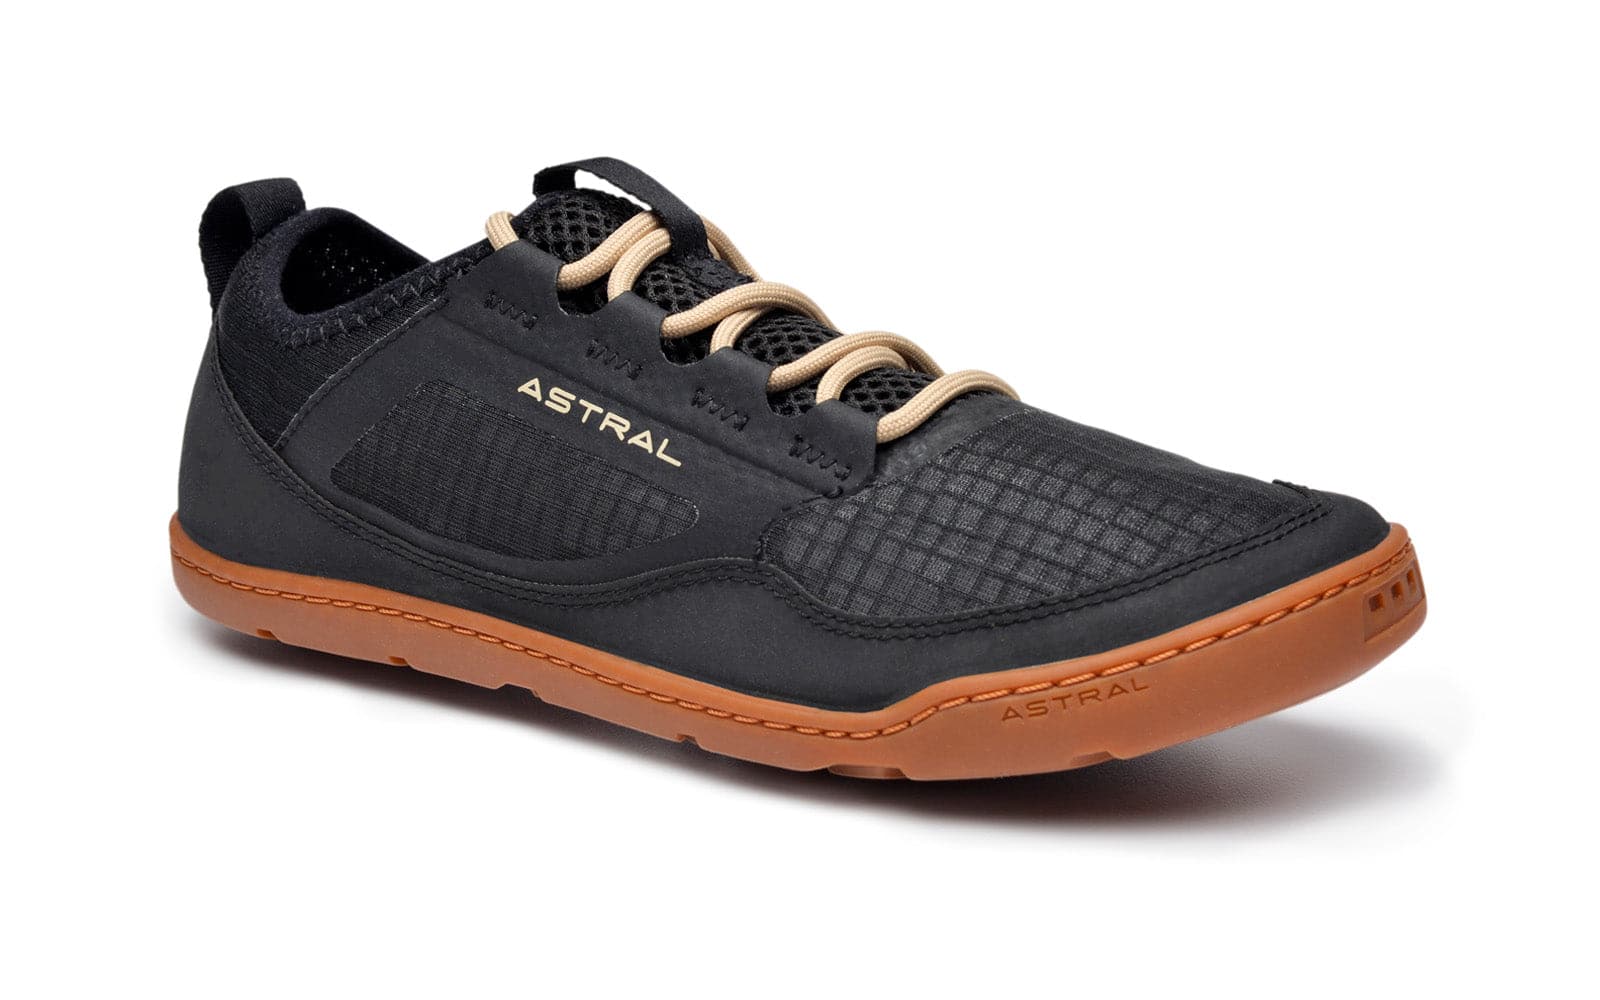 Featuring the Loyak AC - Women's women's footwear manufactured by Astral shown here from a second angle.